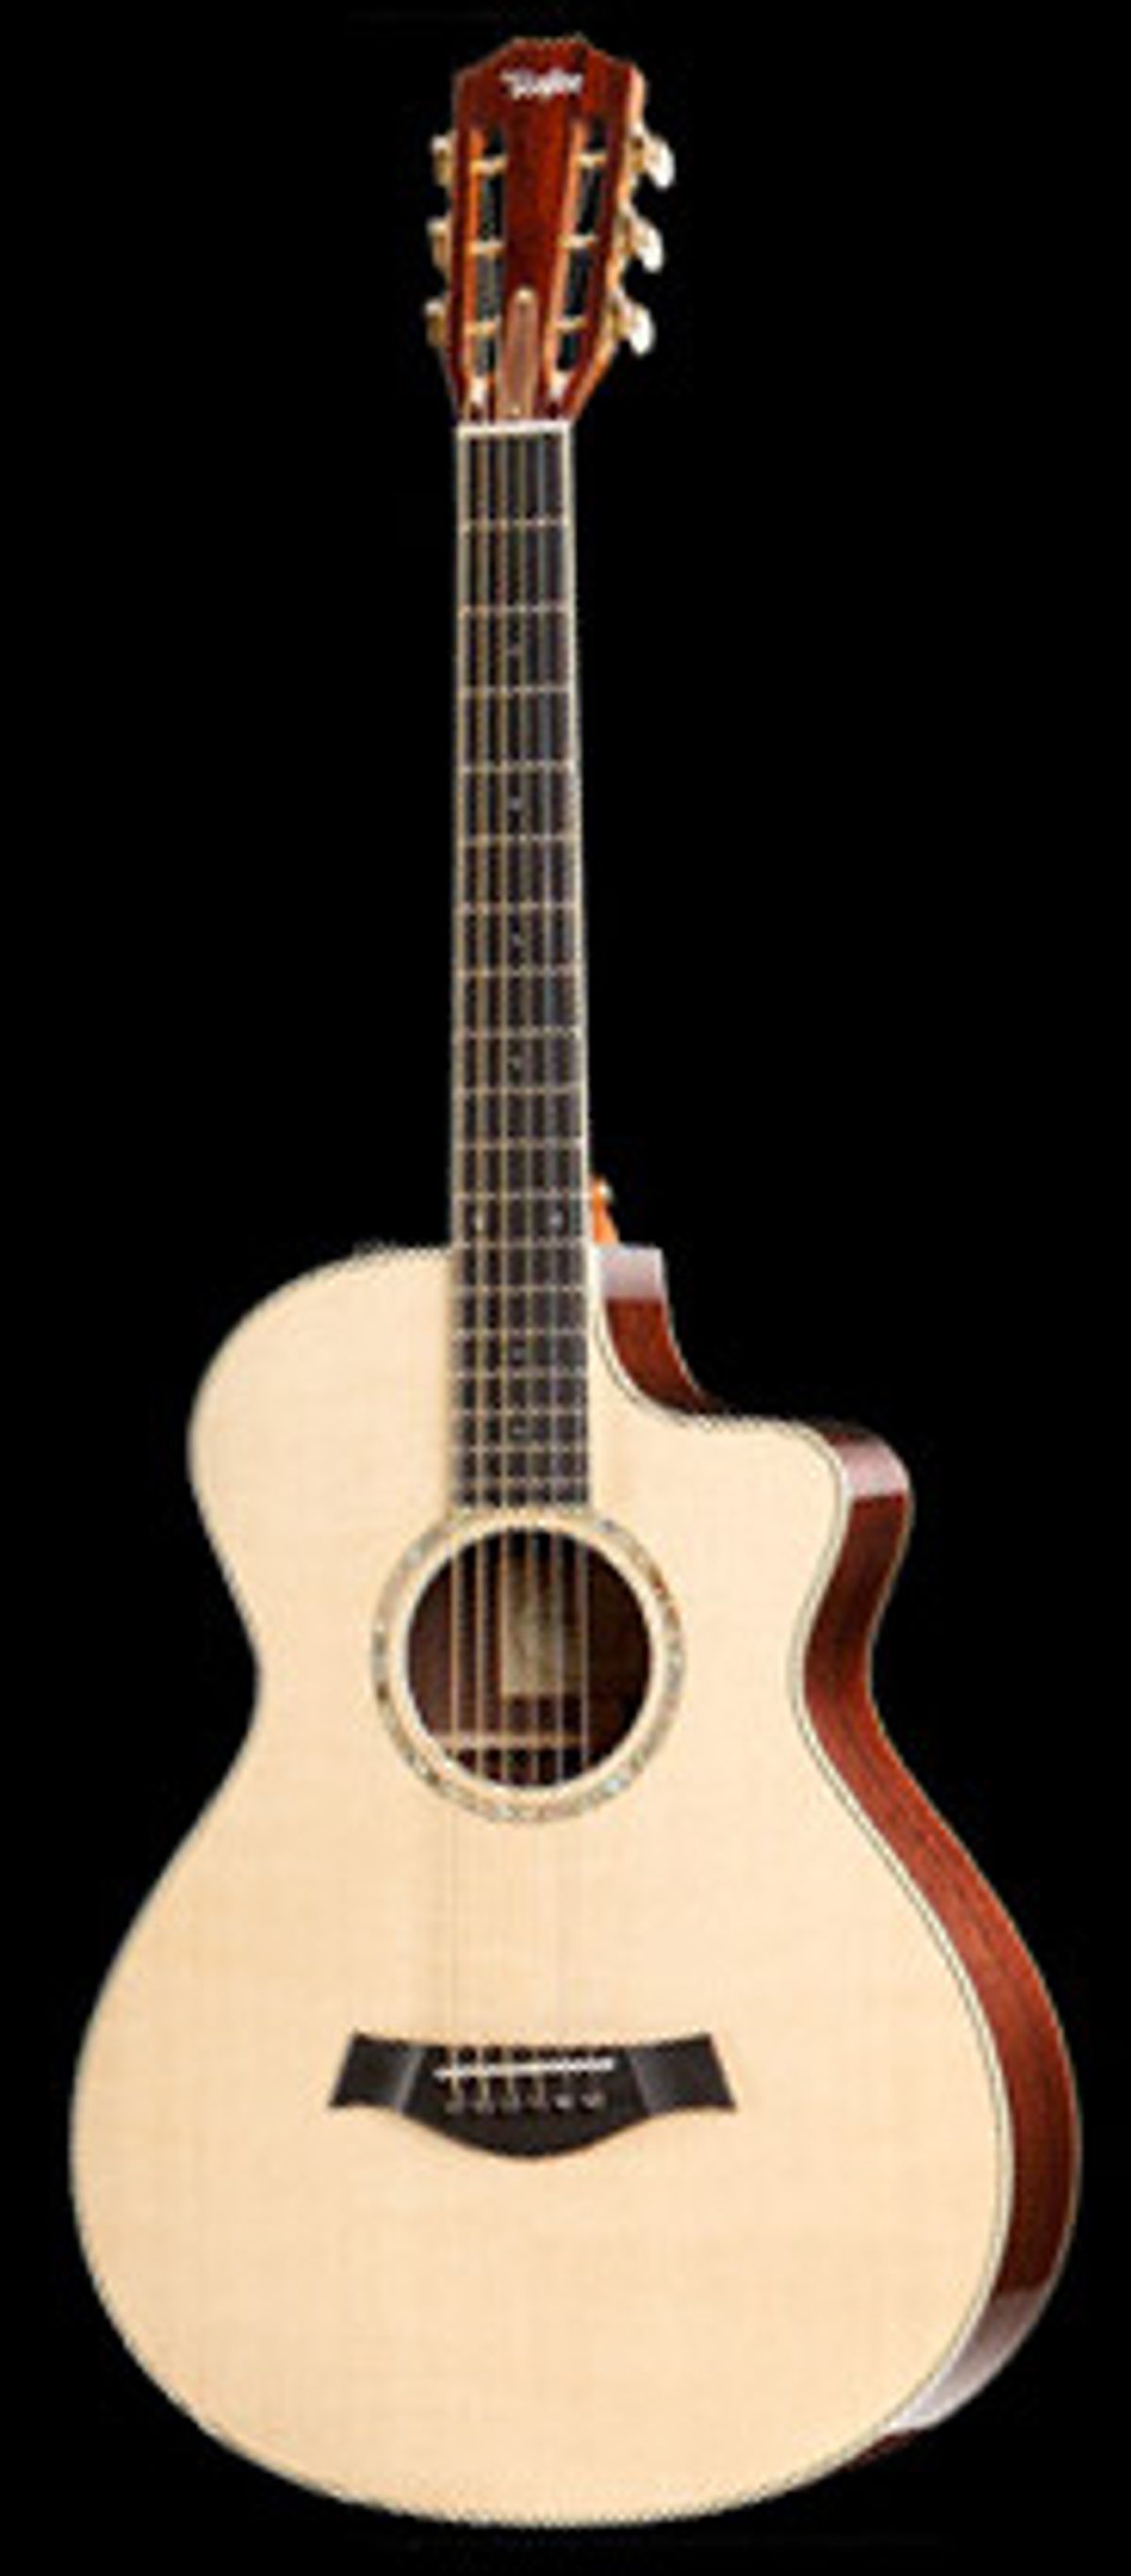 Taylor Guitars Adds 12-Fret Model to Specialty Line